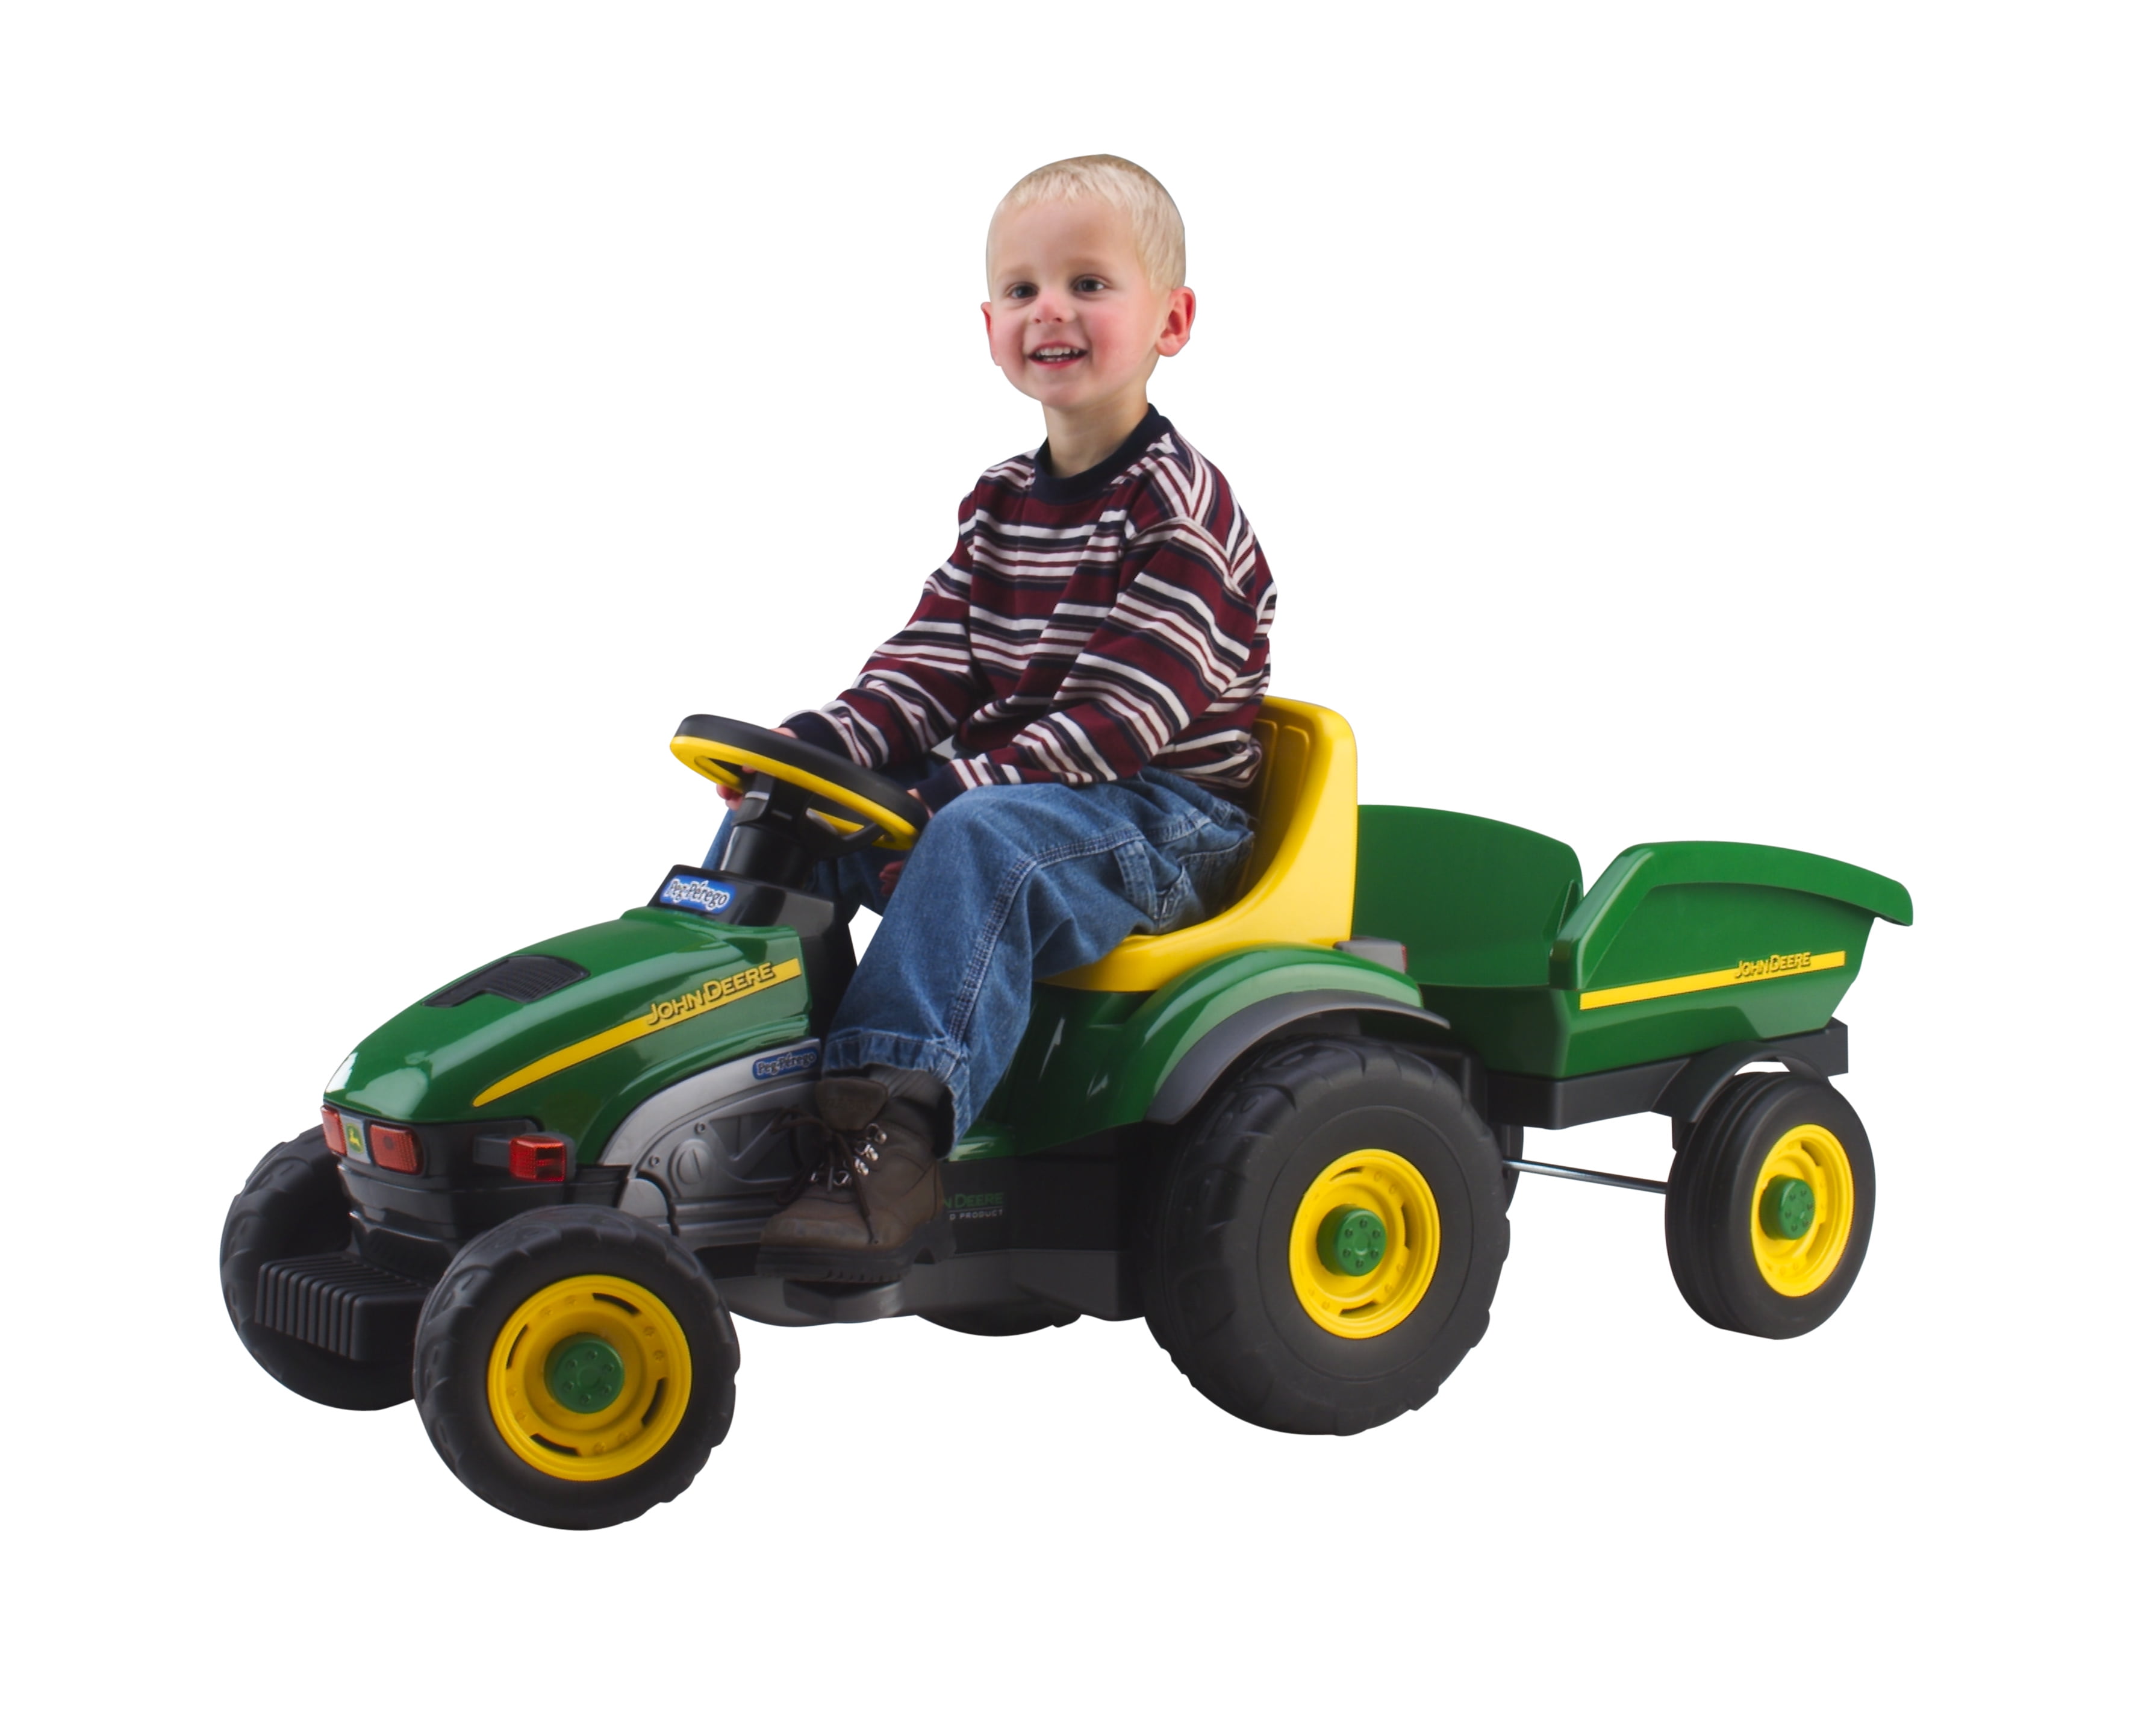 Peg Perego Adventure Trailer Kid On For Durable Power Wheels Play 